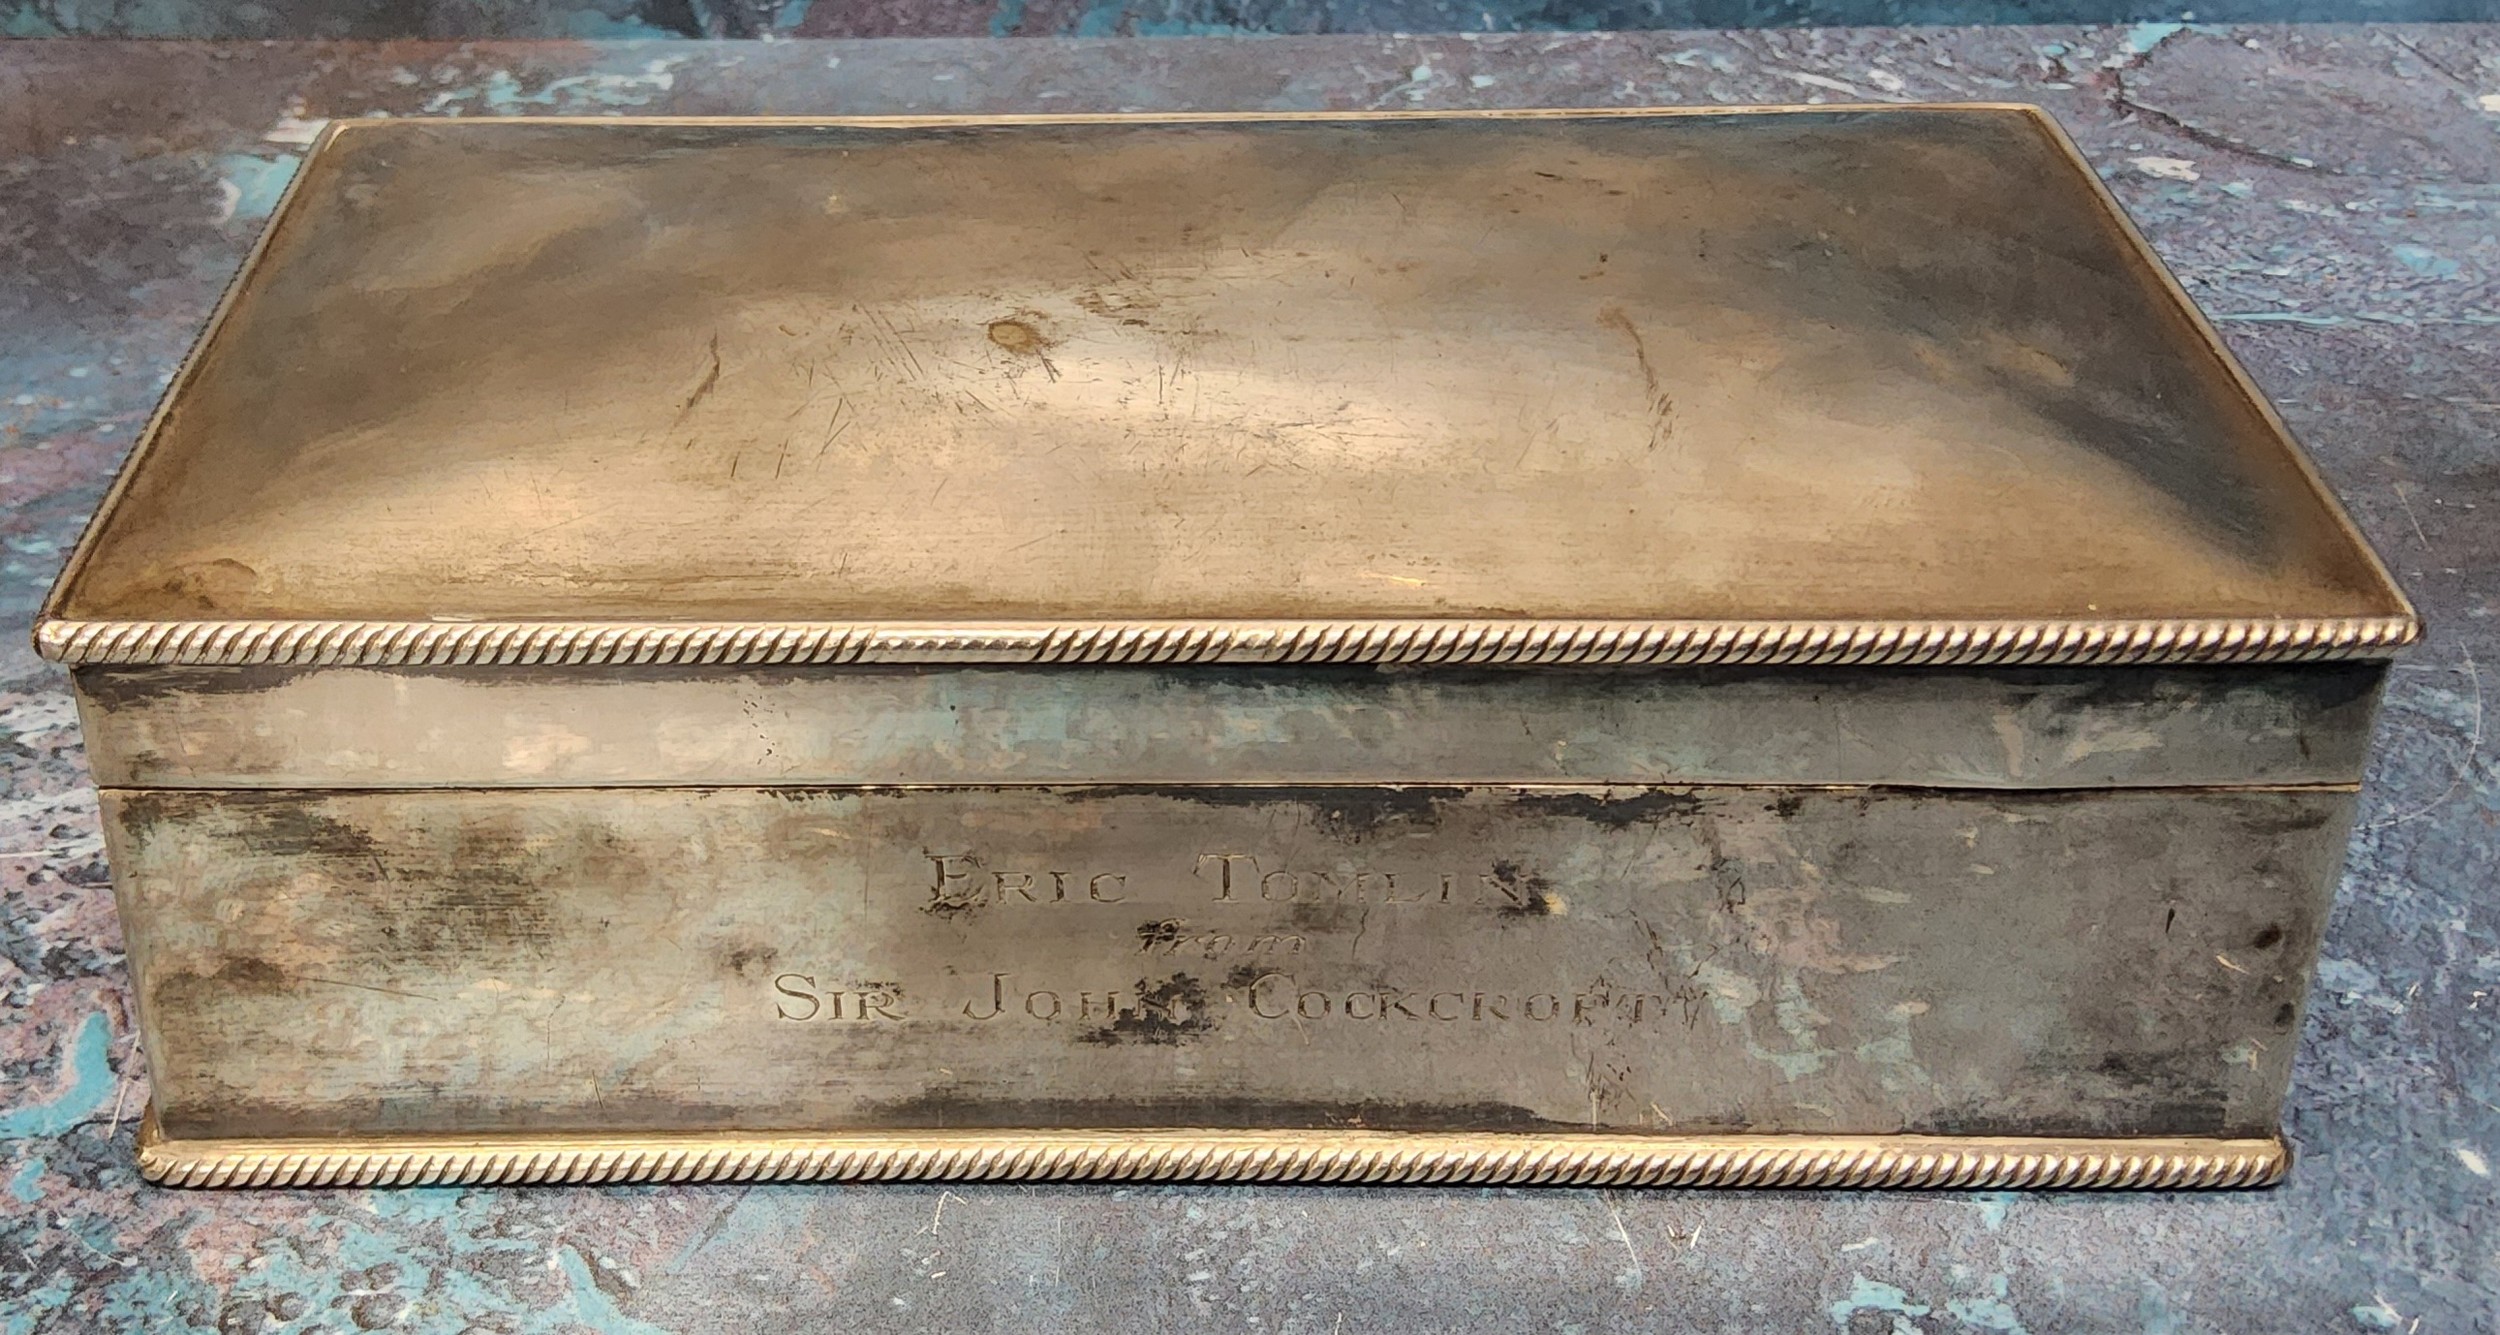 A silver plated cigarette box, cedar lined, engraved Eric Tomlin from Sir John Cockcroft (